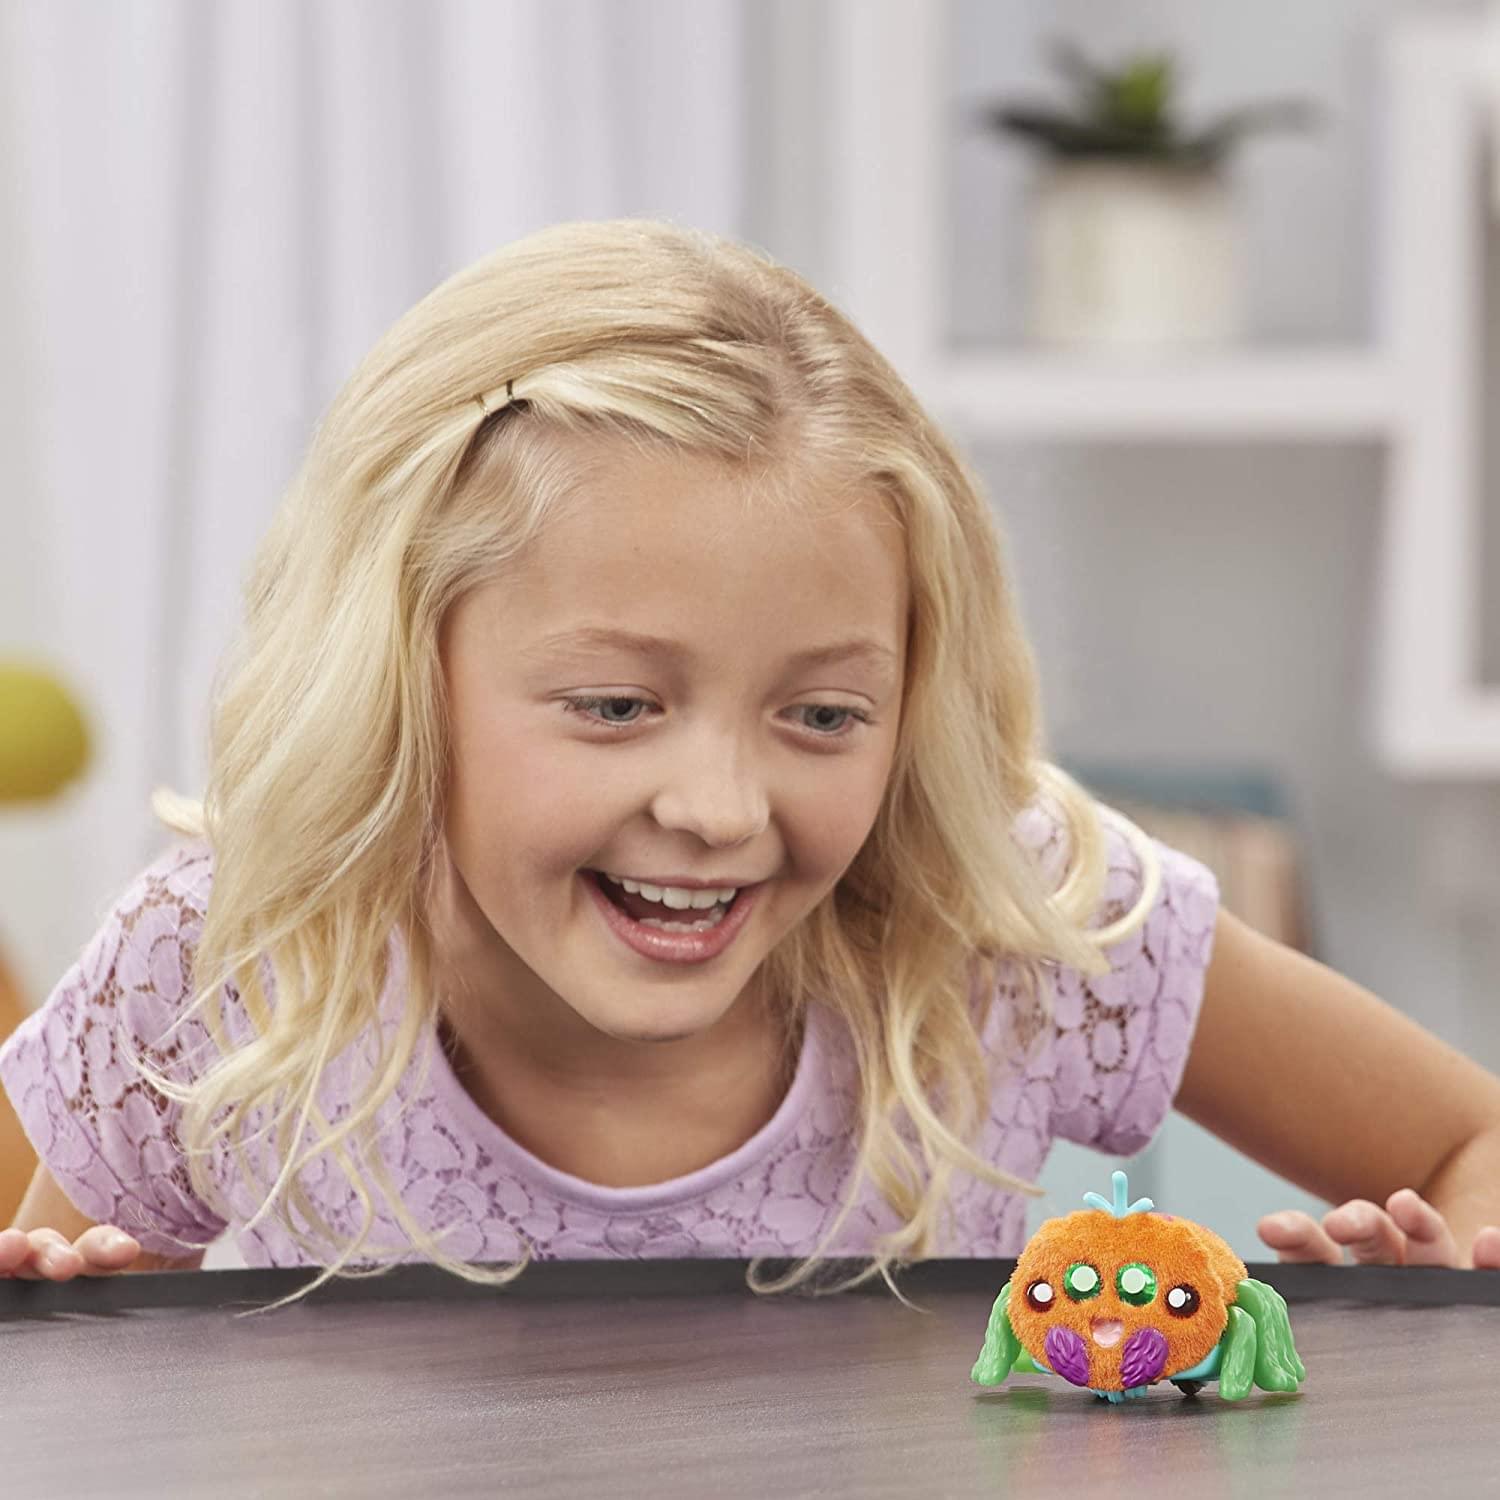 Yellies! Voice-Activated Spider Pet | Toots